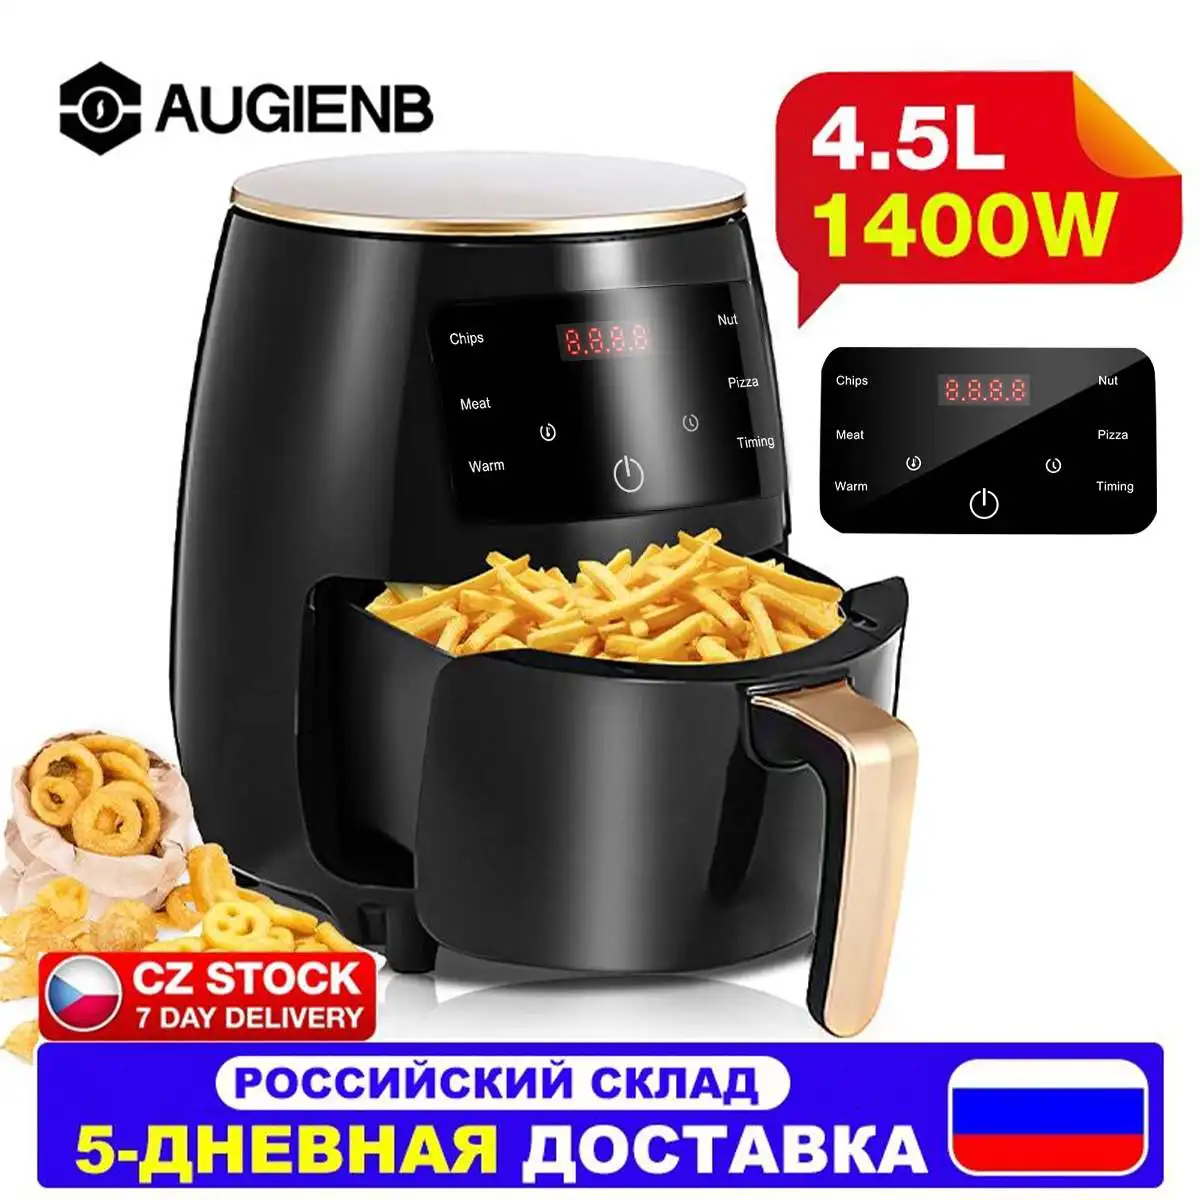 AUGIENB 1400W 4.5L Air Fryer Oil free Health Fryer Cooker 220V Multifunction Smart Touch LCD Airfryer French fries Pizza Fryer